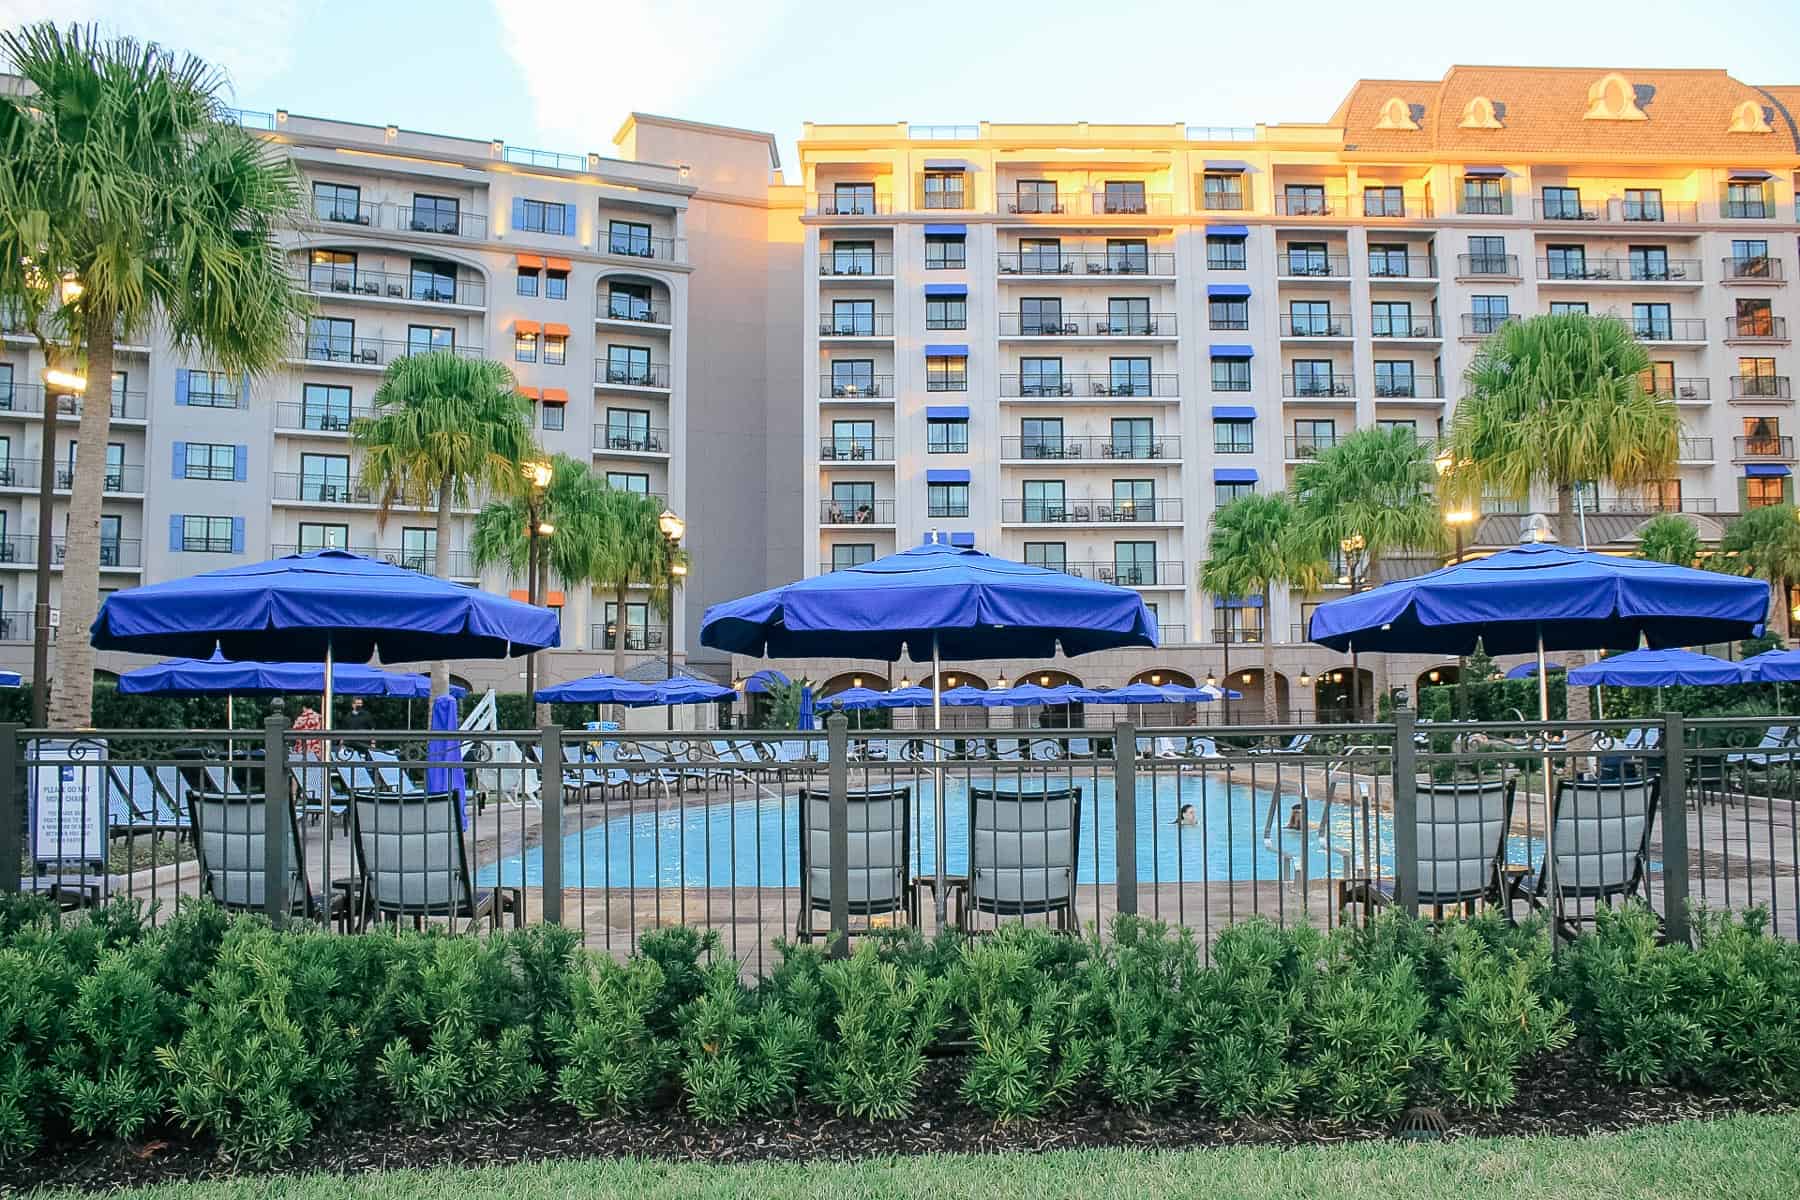 the sun shining on Disney's Riviera in the backdrop with the pool toward the front 